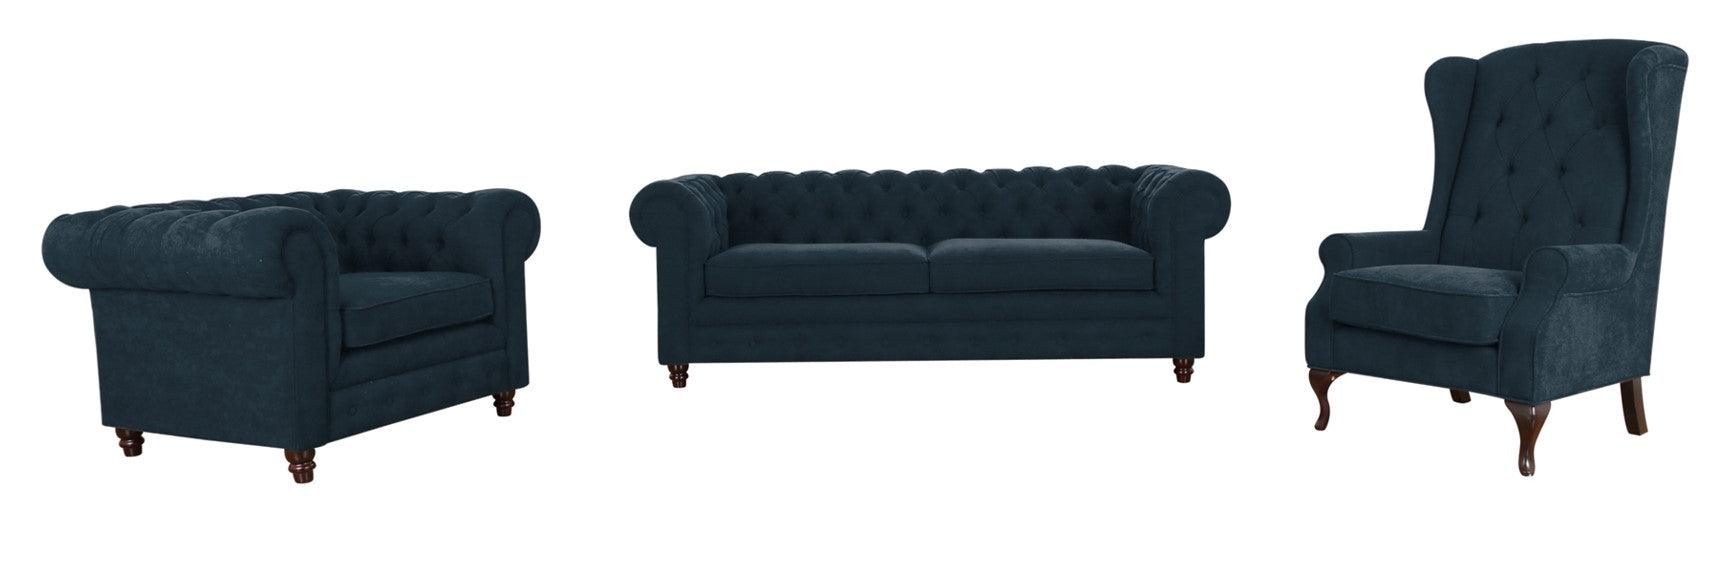 Rosy Luxurious 3 piece Sofa Lounge Chesterfield - Furniture Castle